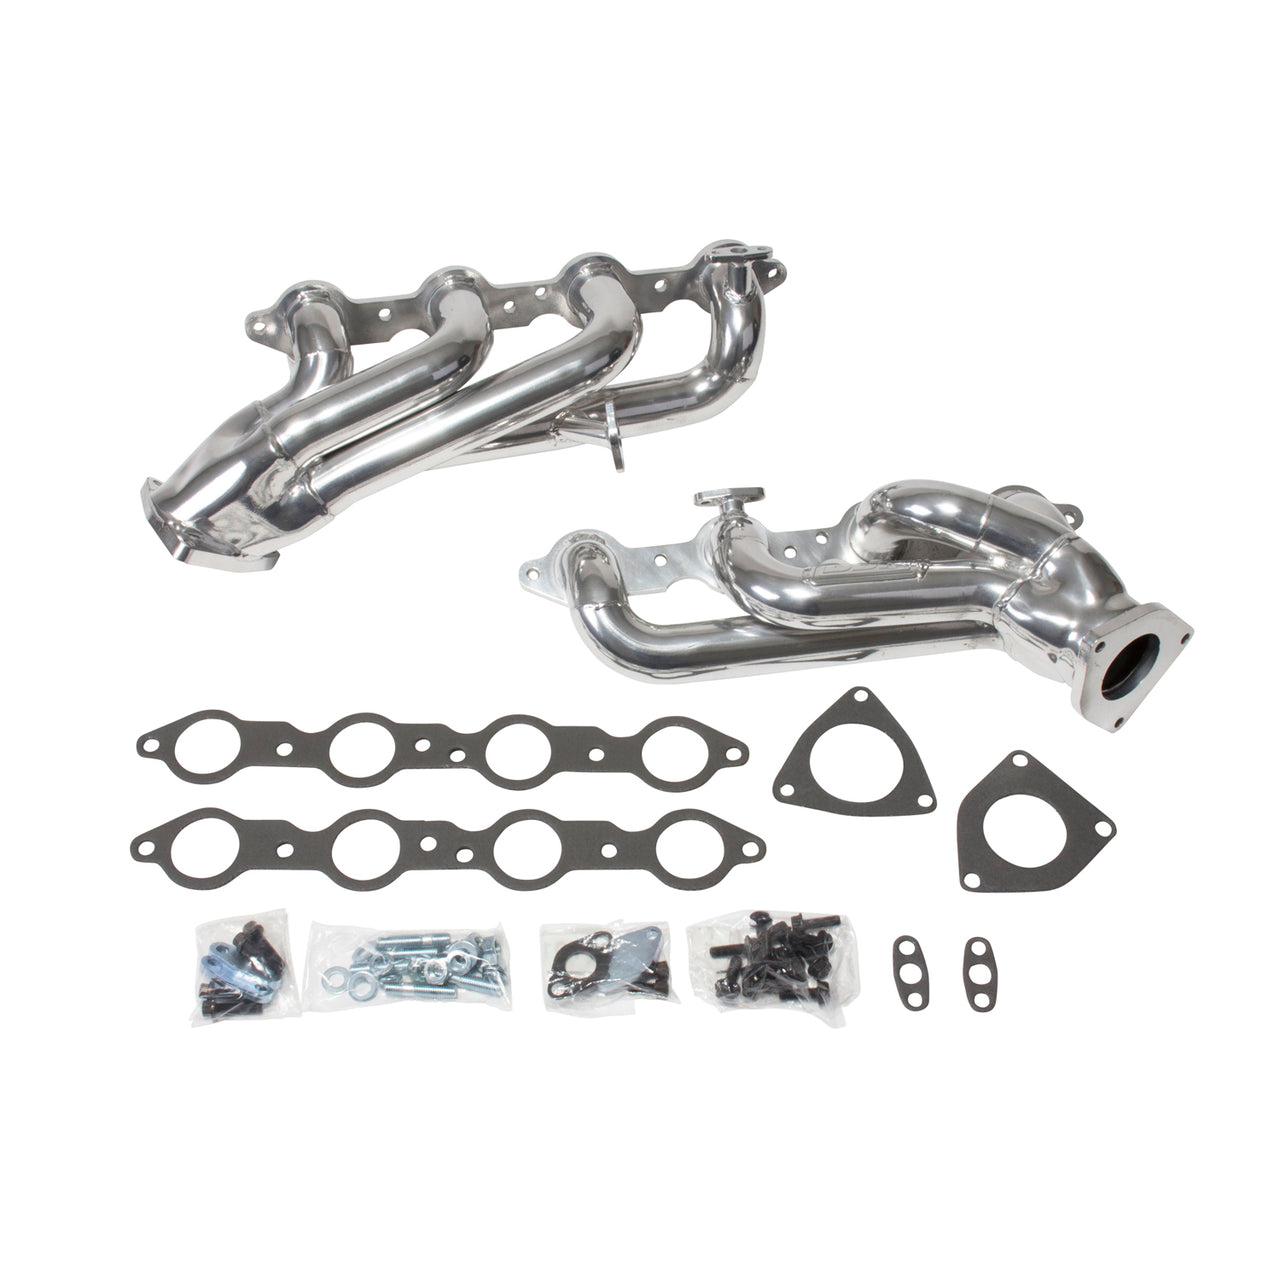 1999-2013 GM TRUCK/SUV 4.8/5.3L 1-3/4 SHORTY HEADERS (POLISHED SILVER CERAMIC)